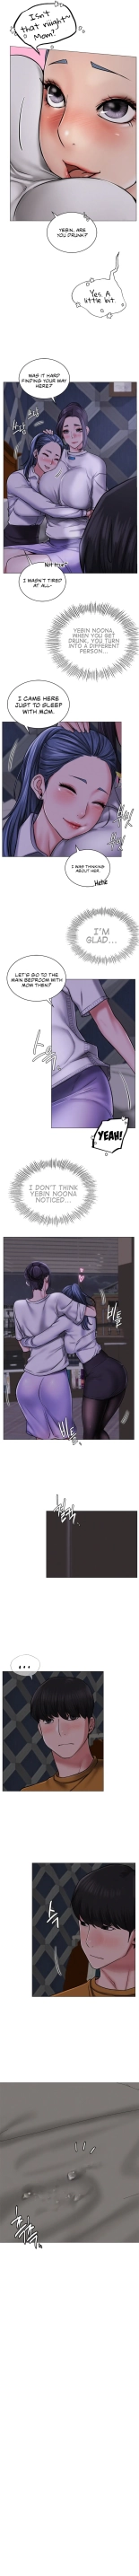 Staying with Ajumma : page 80